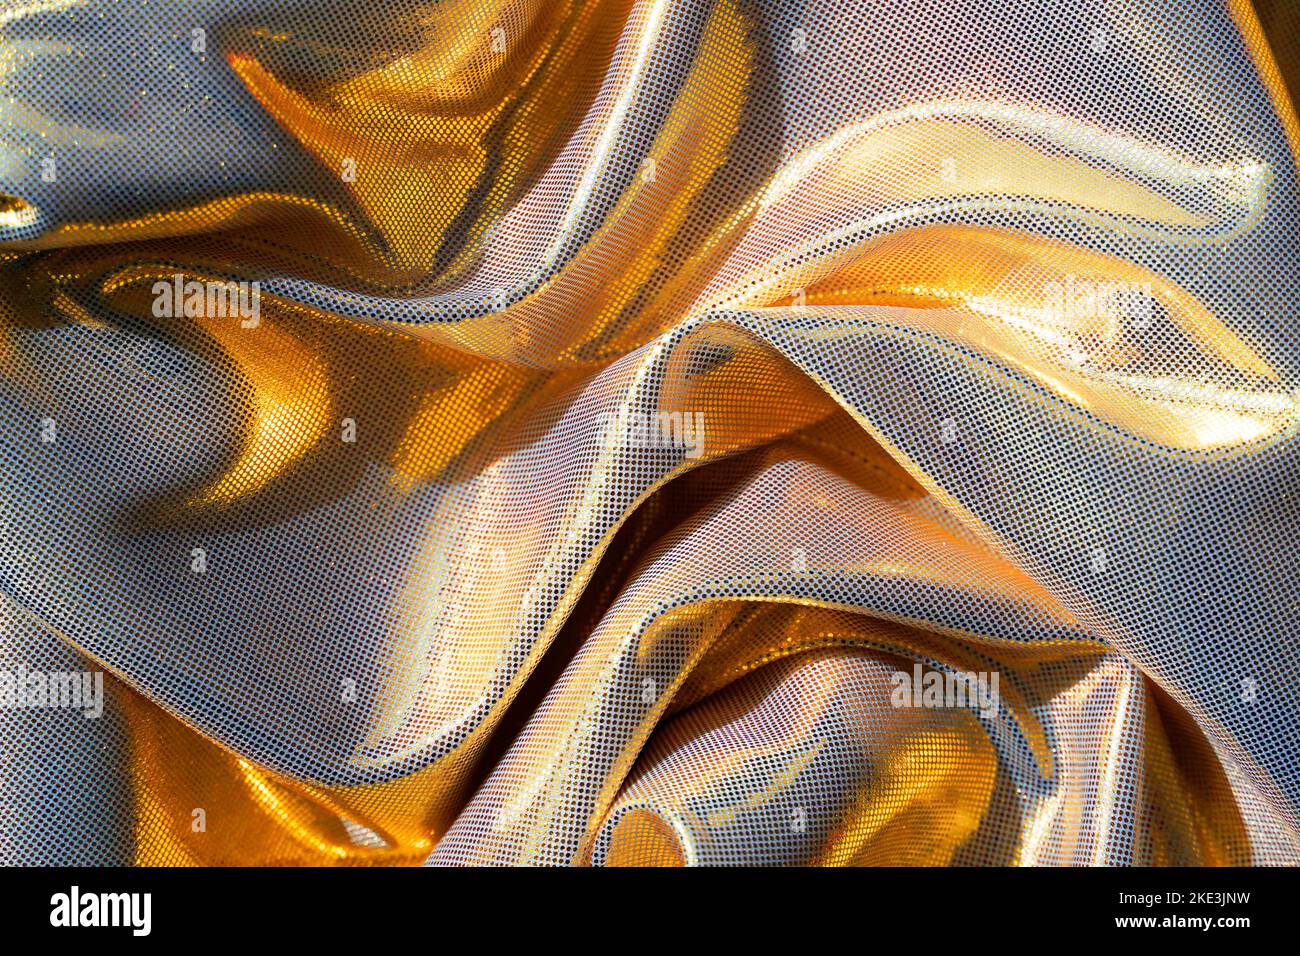 Gold Fabric Color Texture Pattern Stock Photo, Picture and Royalty Free  Image. Image 41256906.